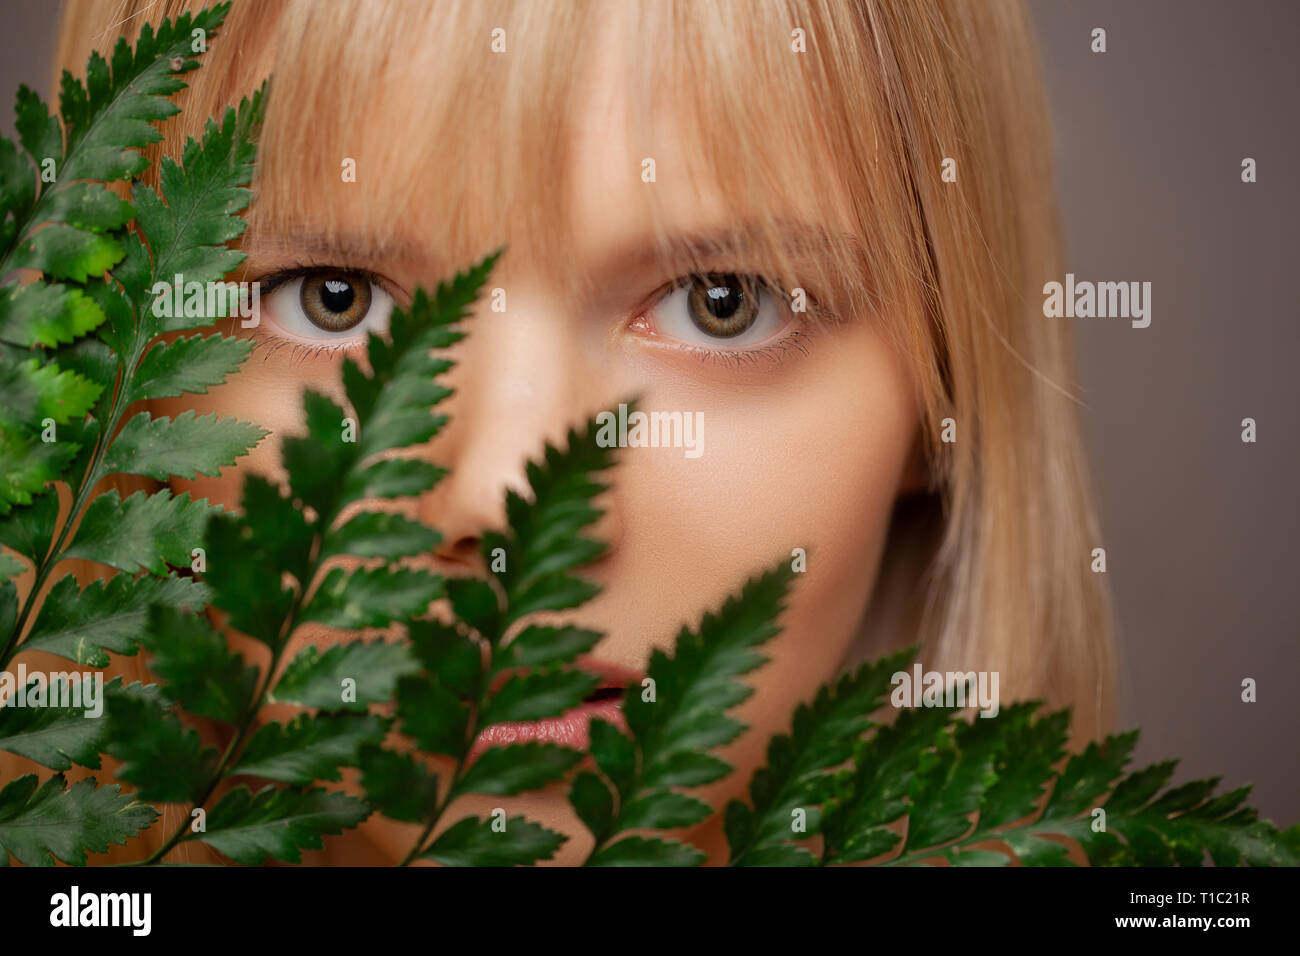 close up view of beautiful woman, branch of a fern covers the face. Eye care, contact lenses and beauty. Stock Photo